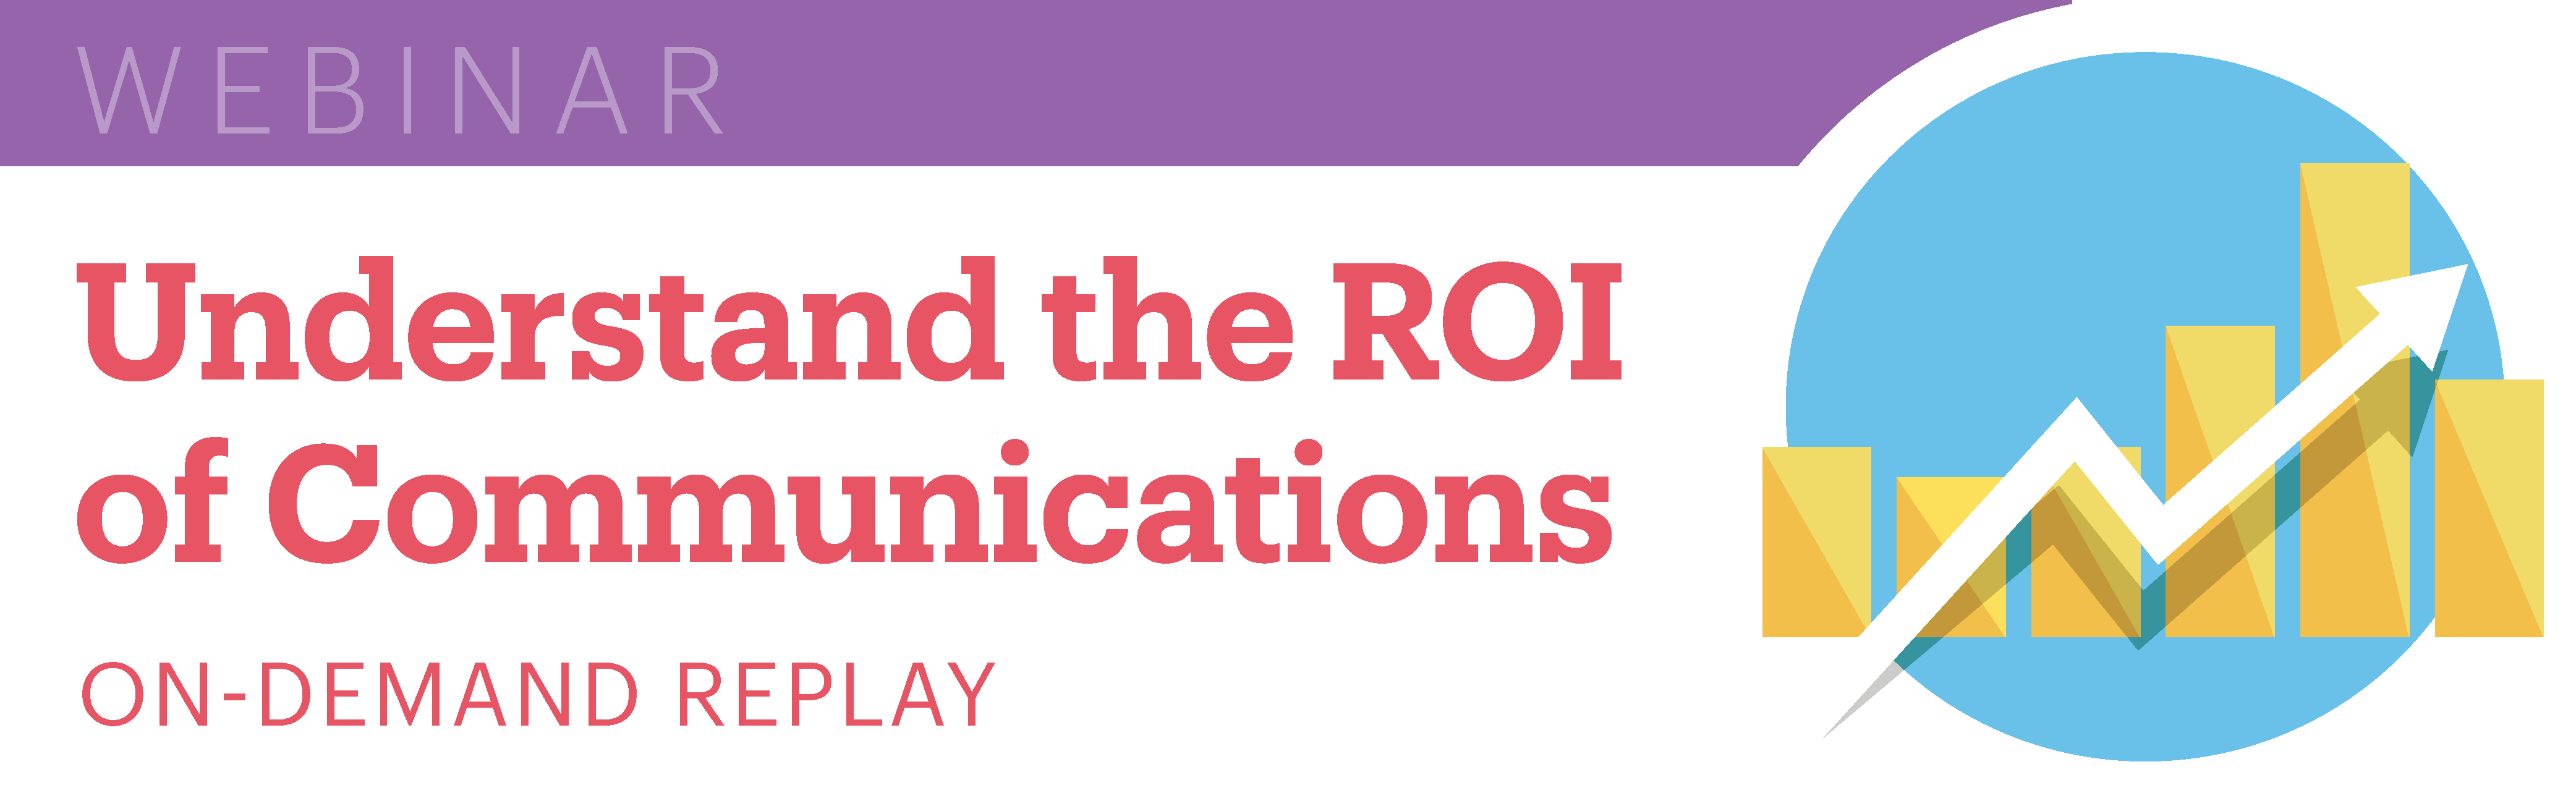 Understand the ROI of Communications